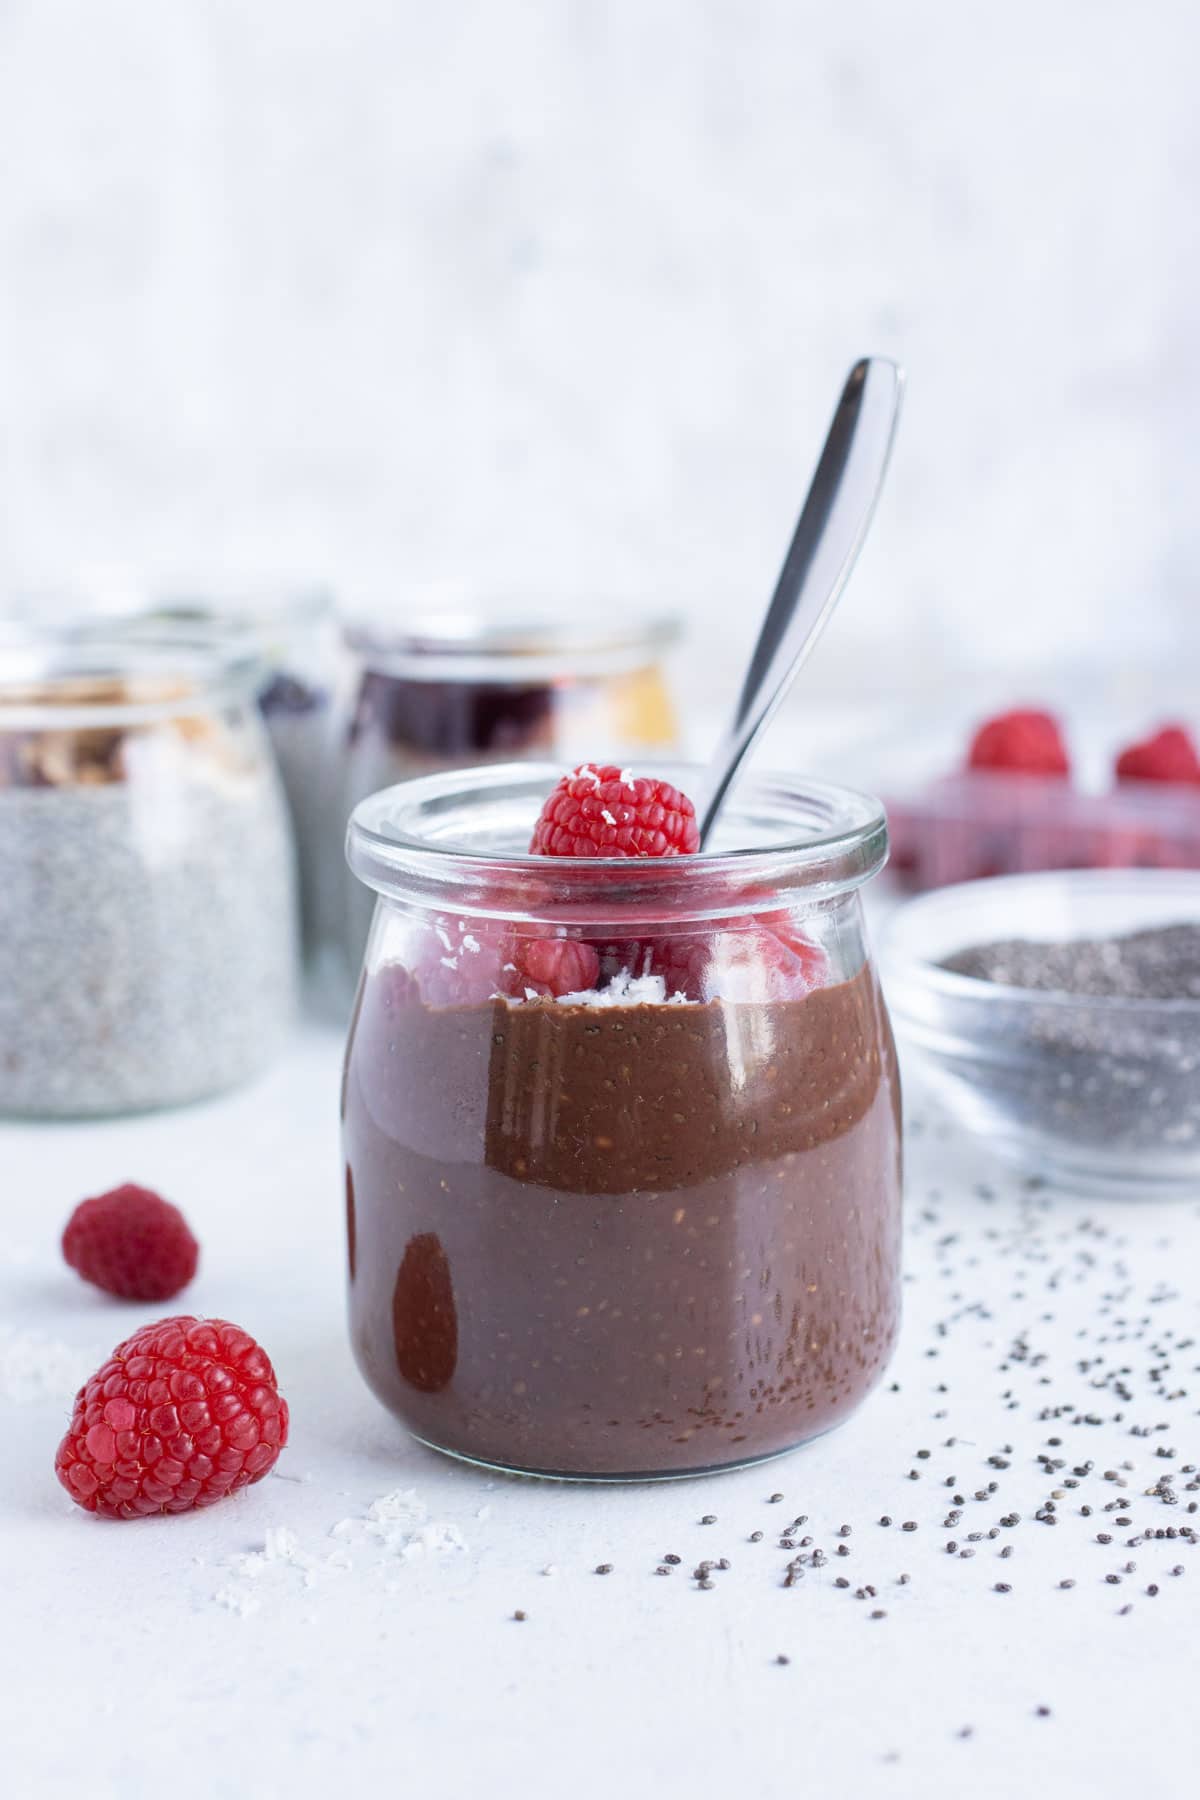 Chocolate and raspberry chia pudding can be made.